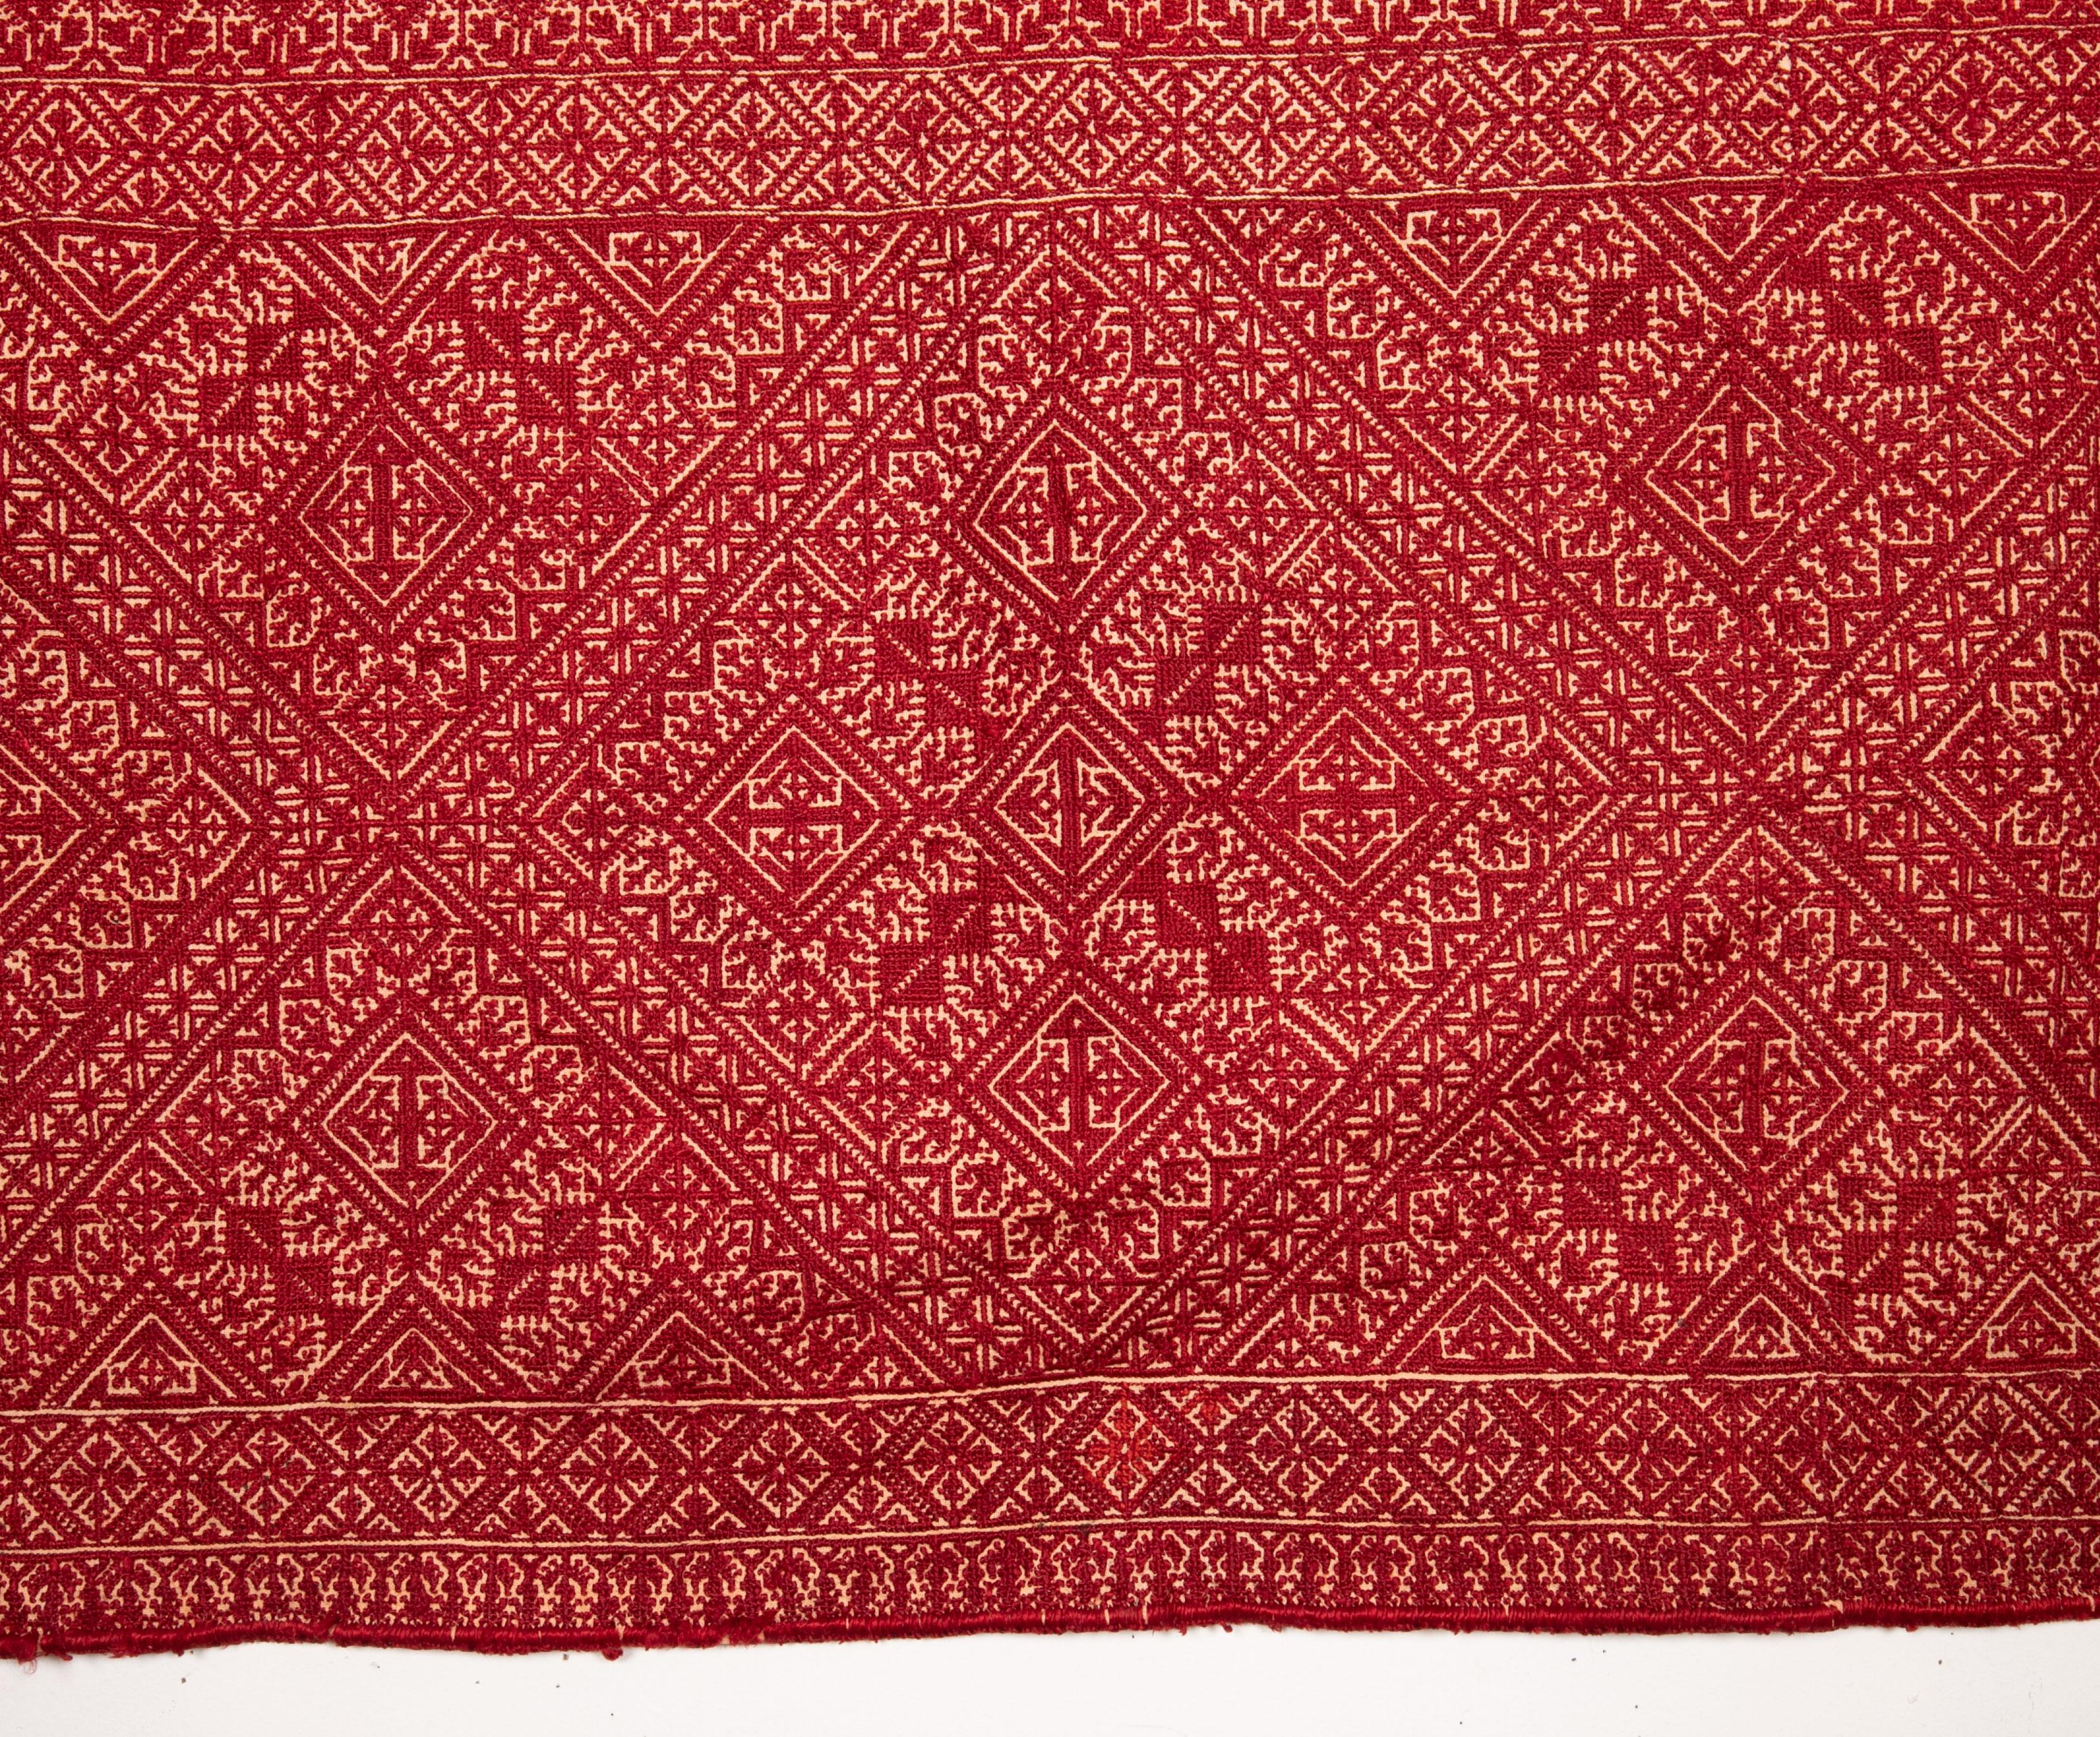 Moroccan Fez Silk Embroidery from Fez Morocco, Early 20th Century